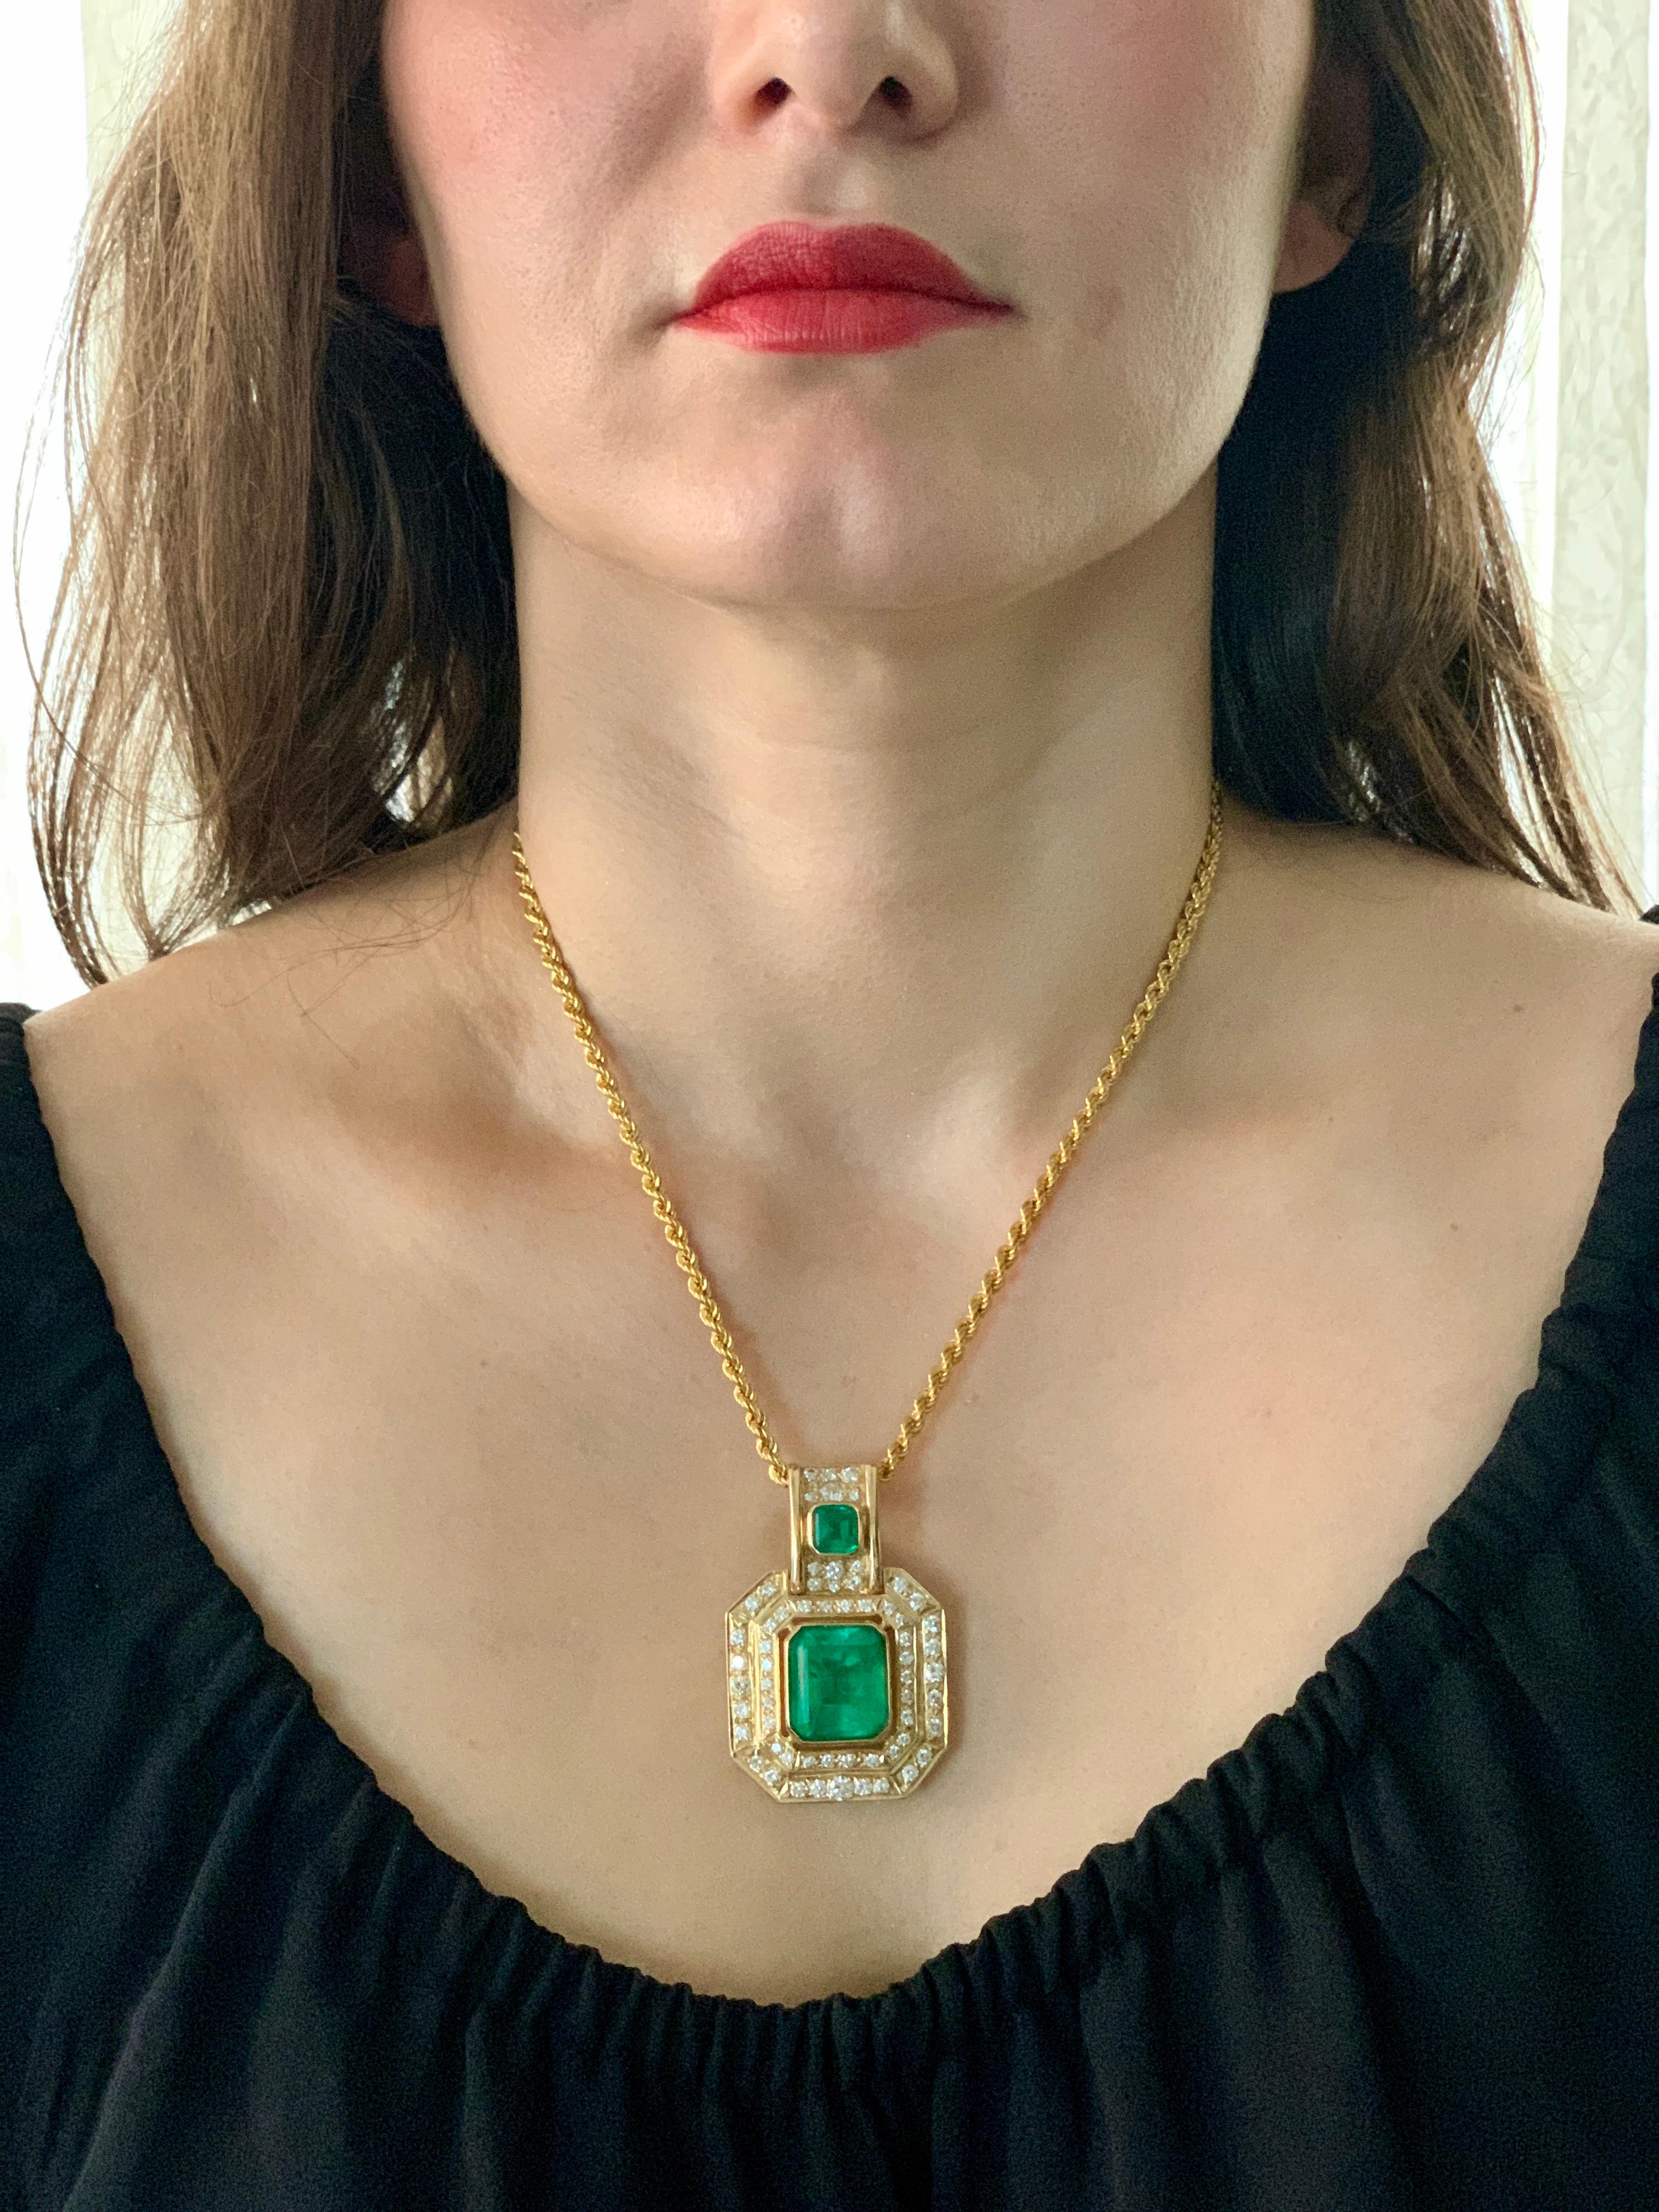 AGL Certified Minor 20 Ct Colombian Emerald & 5 Ct Diamond Pendent/Necklace 14K 3